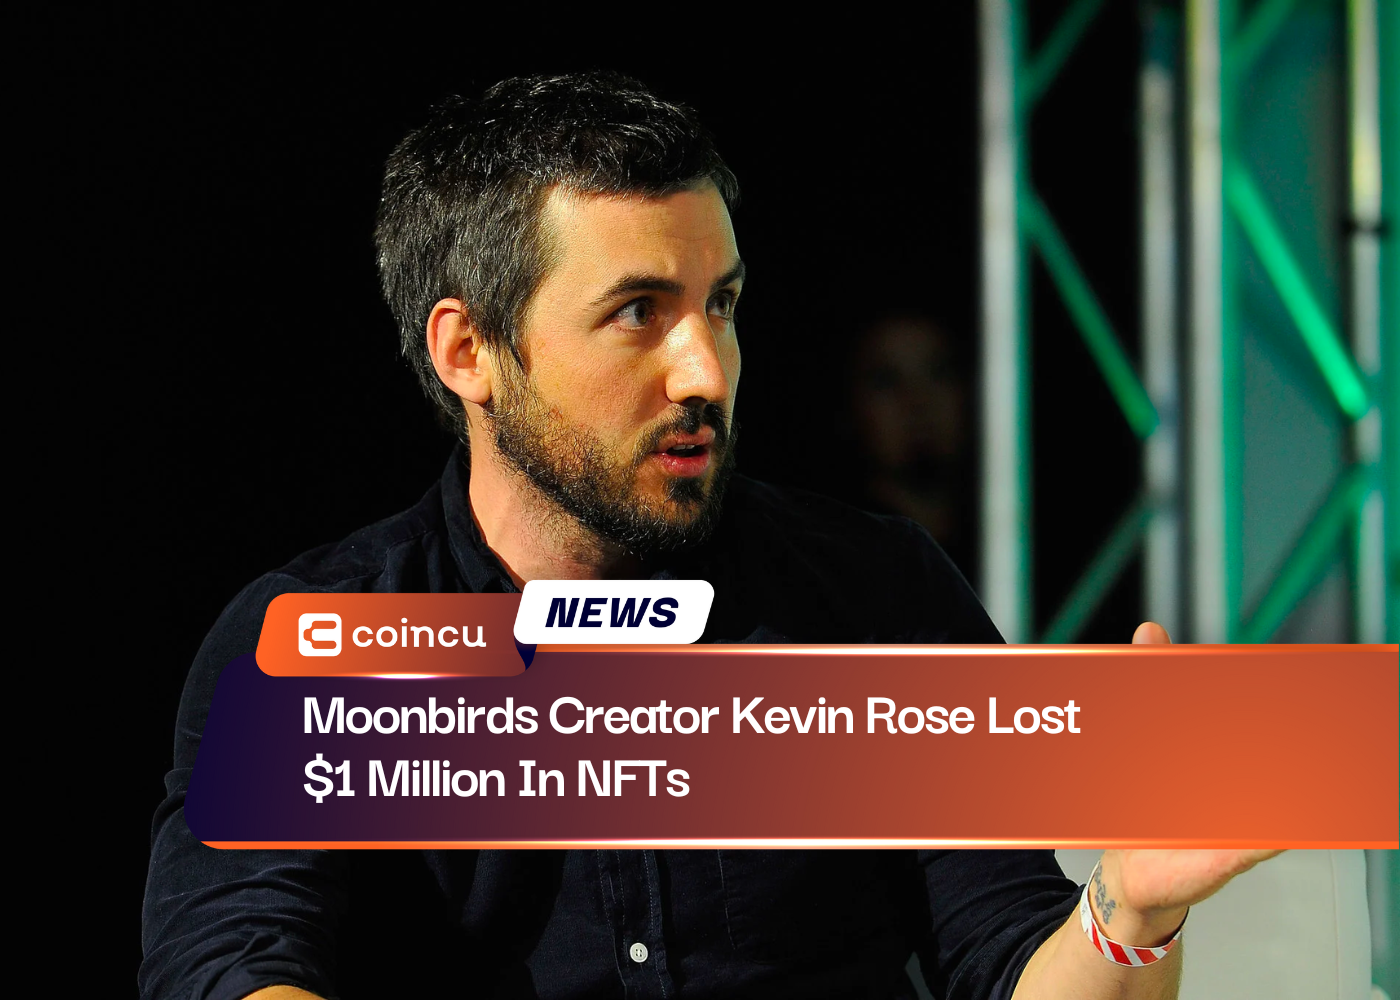 Moonbirds Creator Kevin Rose Lost $1 Million In NFTs